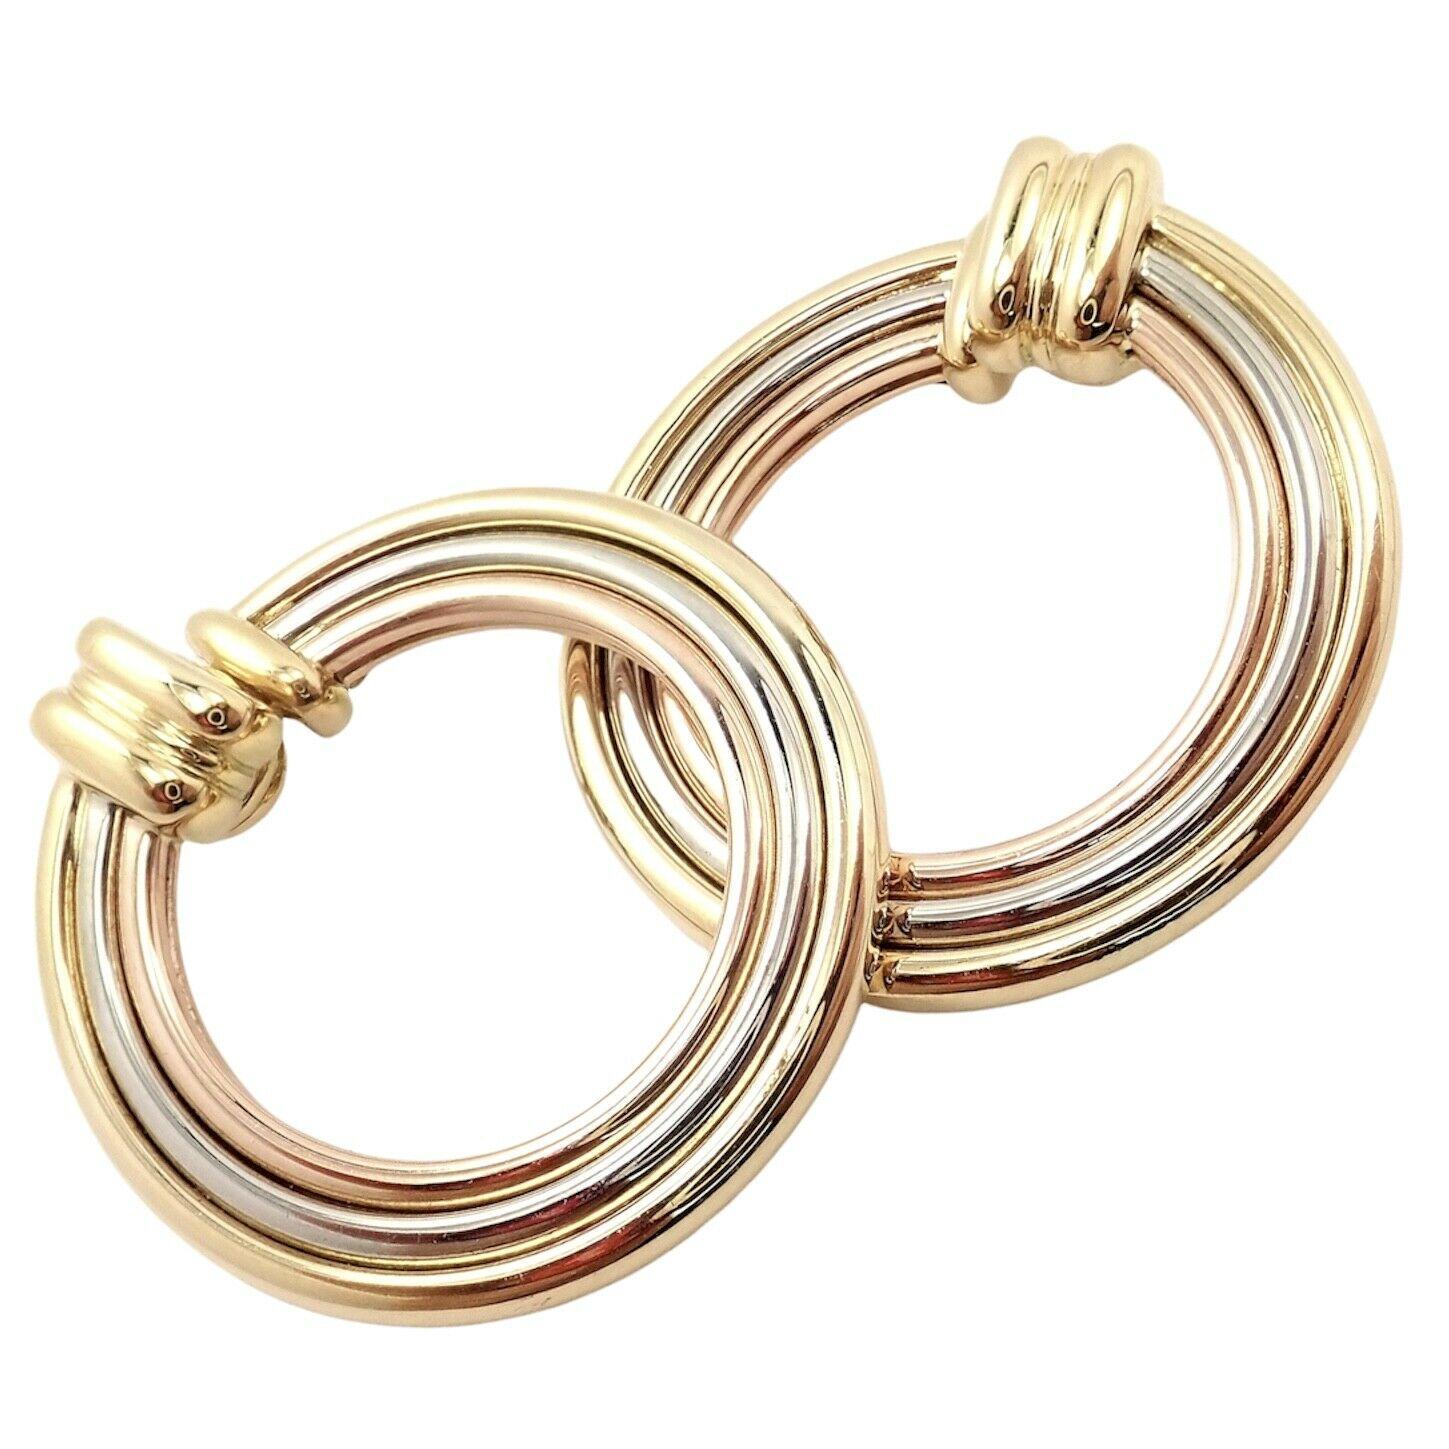 18k Tri-Color (Yellow, White, Rose) Gold Large Trinity Hoop Earrings by Cartier. 
These earrings are for pierced ears.
Details: 
Measurements: 30mm x 31mm
Weight: 15.4 grams
Stamped Hallmarks: Cartier 750 779XXX (serial number omitted)
*Free